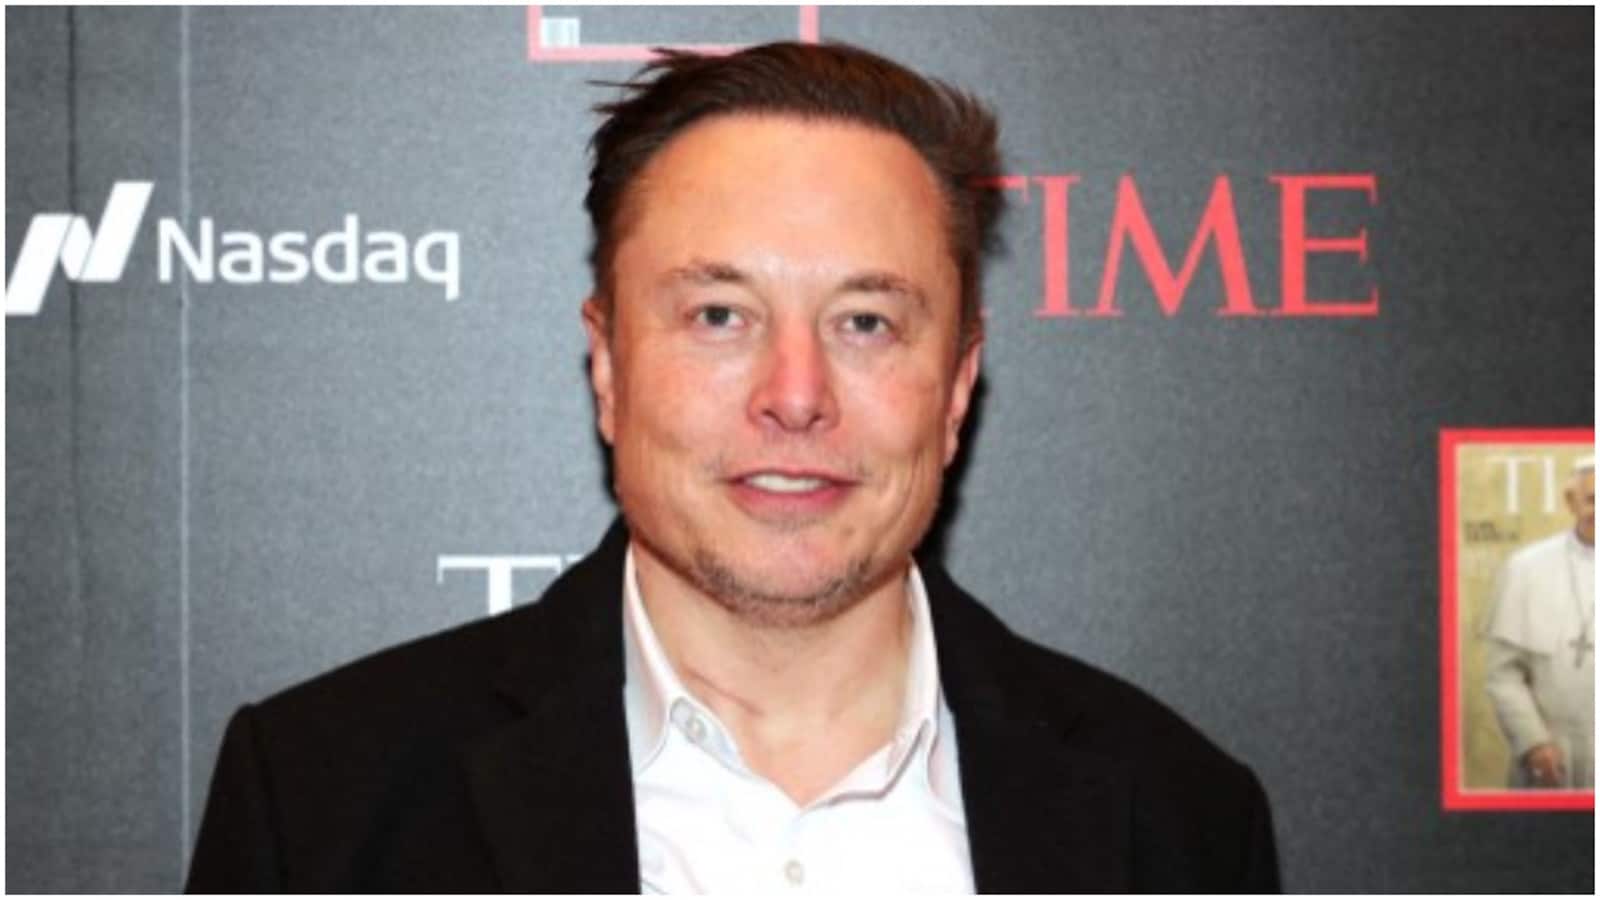 Man who lost money after investing in dogecoin sues Elon Musk for $258  billion